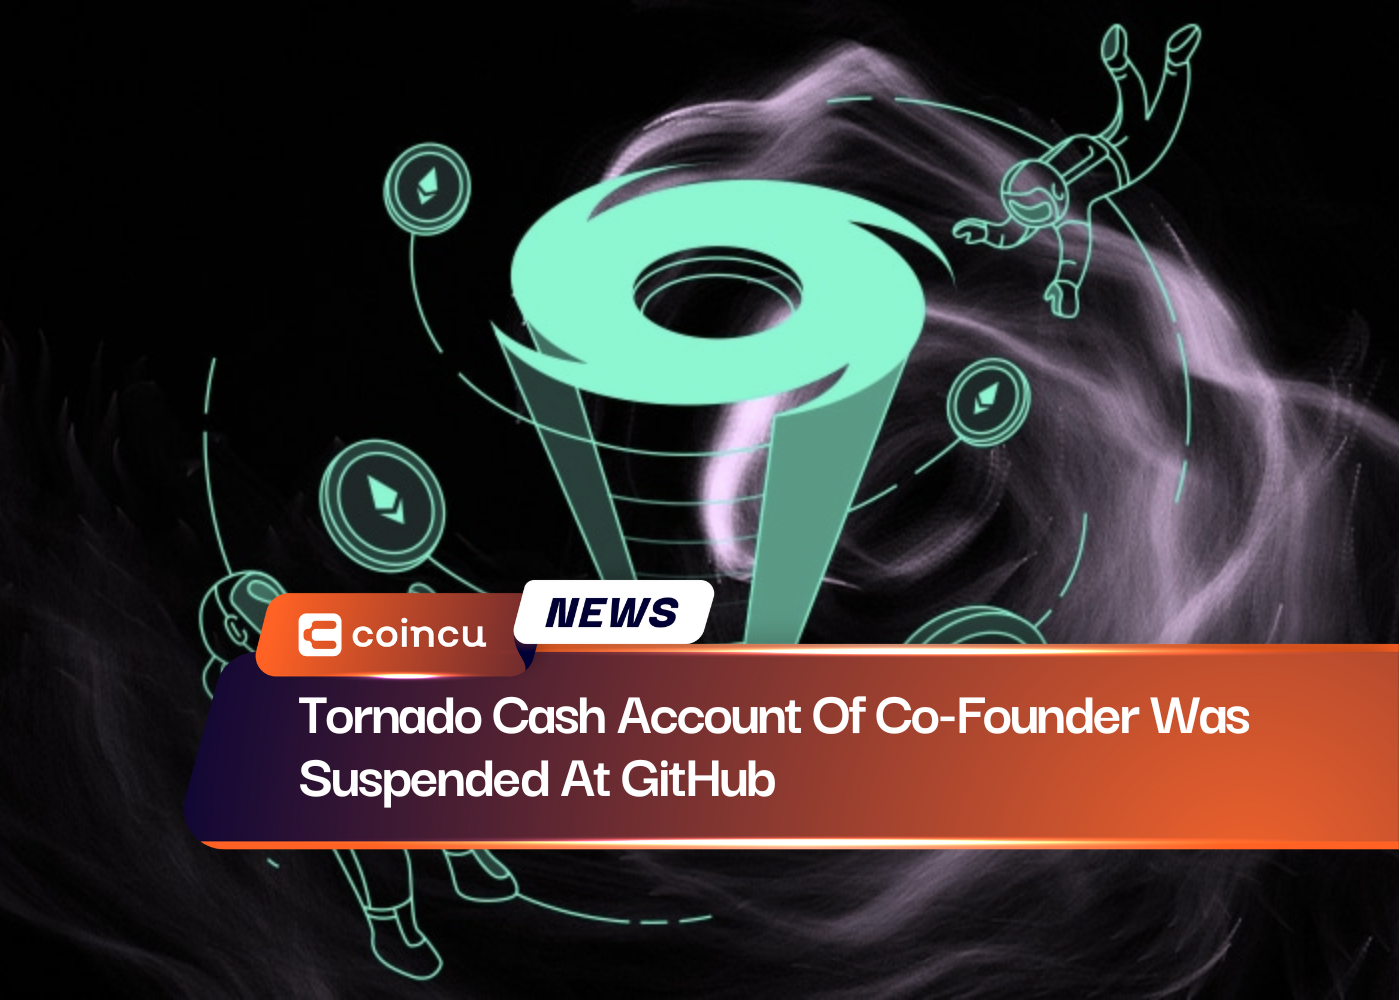 Tornado Cash Account Of Co-Founder Was Suspended At GitHub